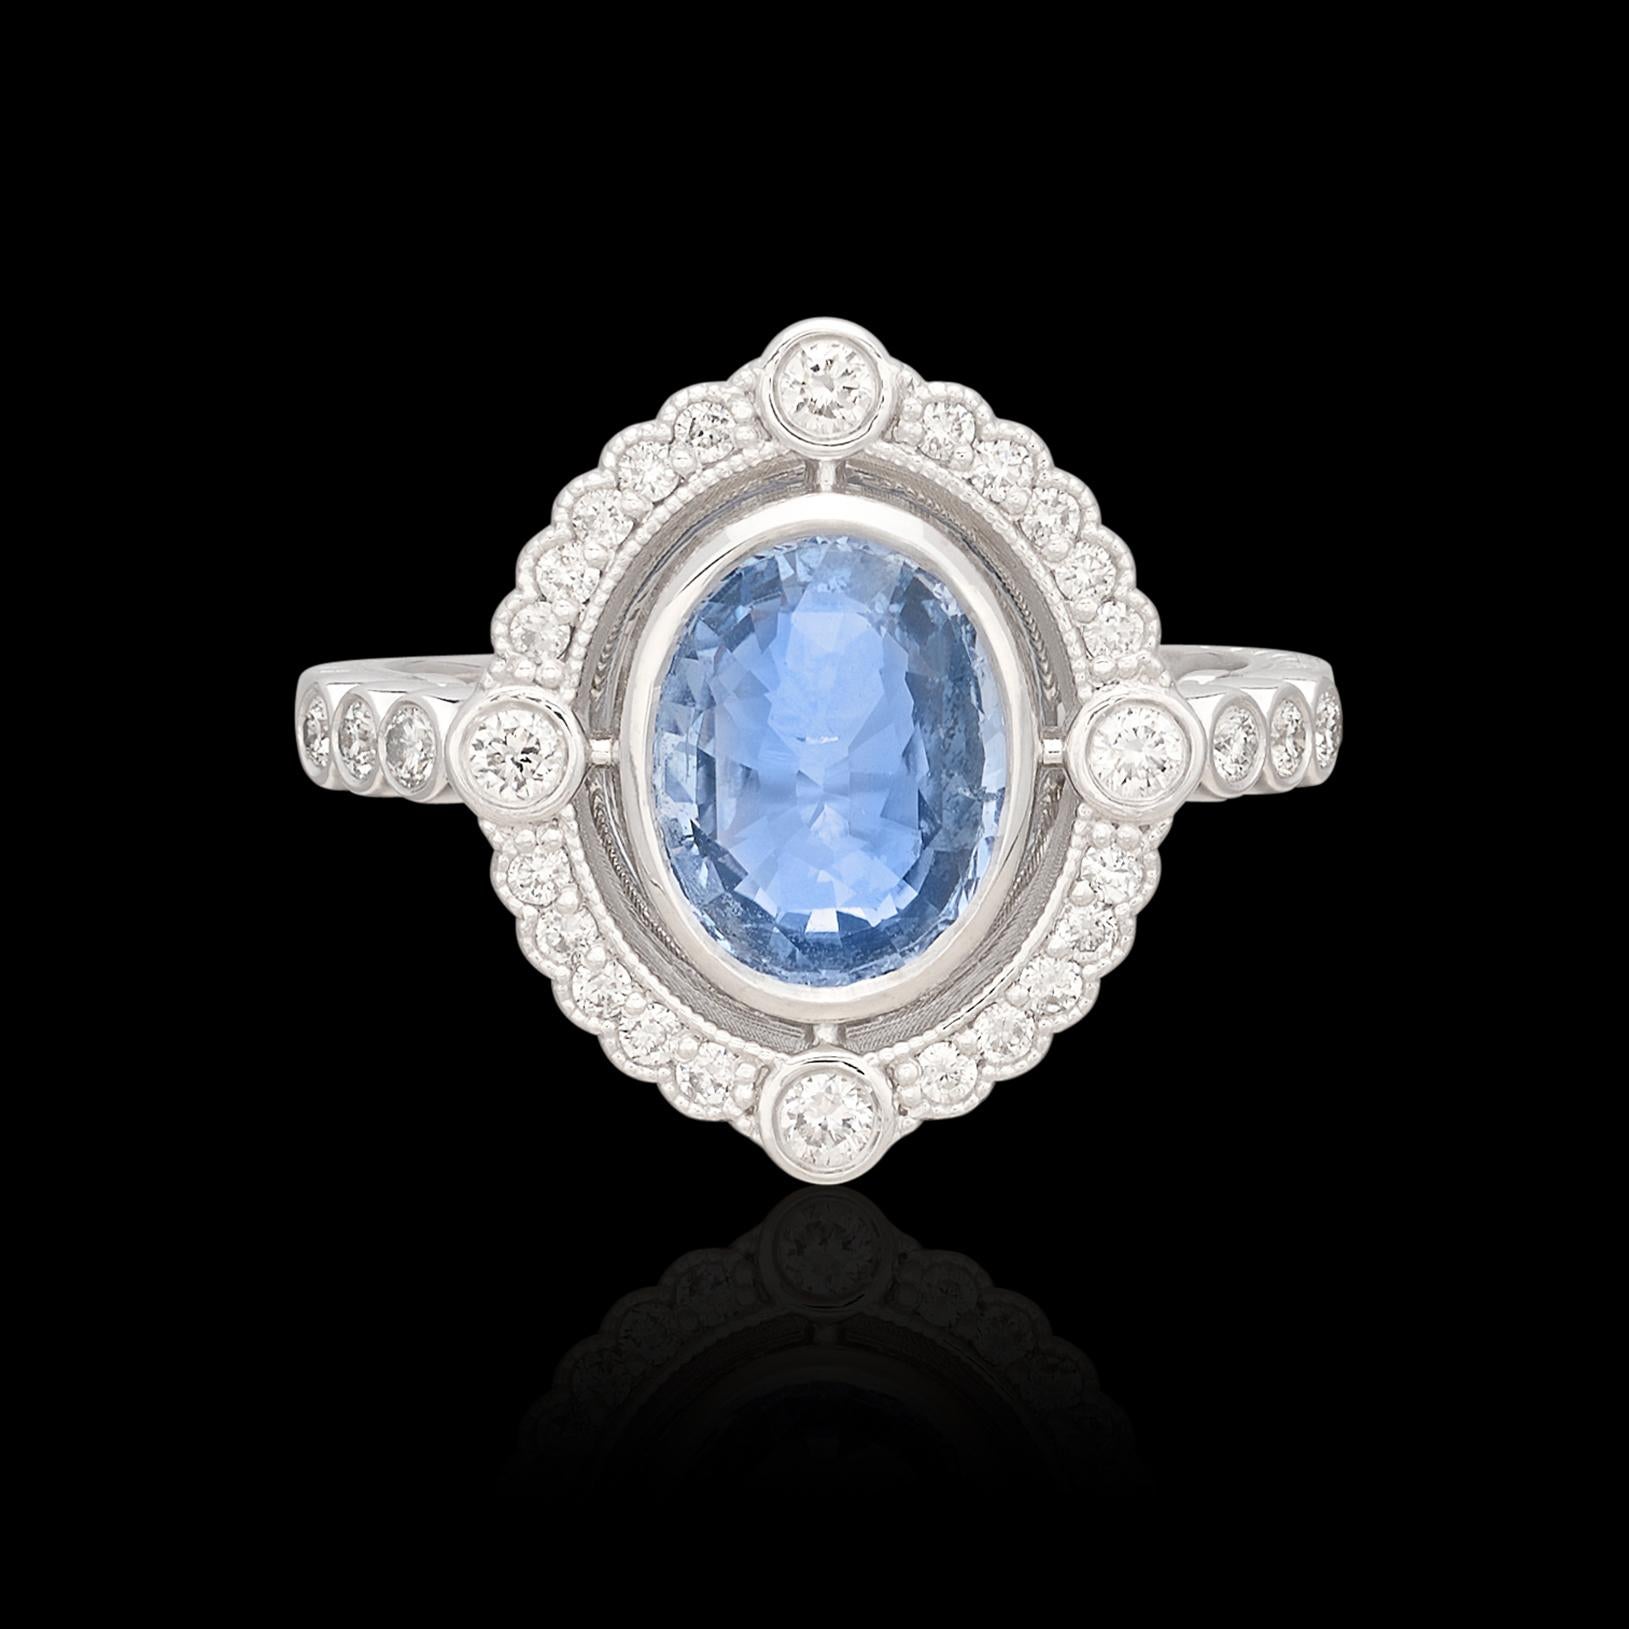 Timeless style and design highlights a unique violet-blue oval sapphire in this Art Deco inspired white gold ring. At the center is a 2.24 carat fine blue natural sapphire exhibiting a delicate blue color with gorgeous saturation that is only